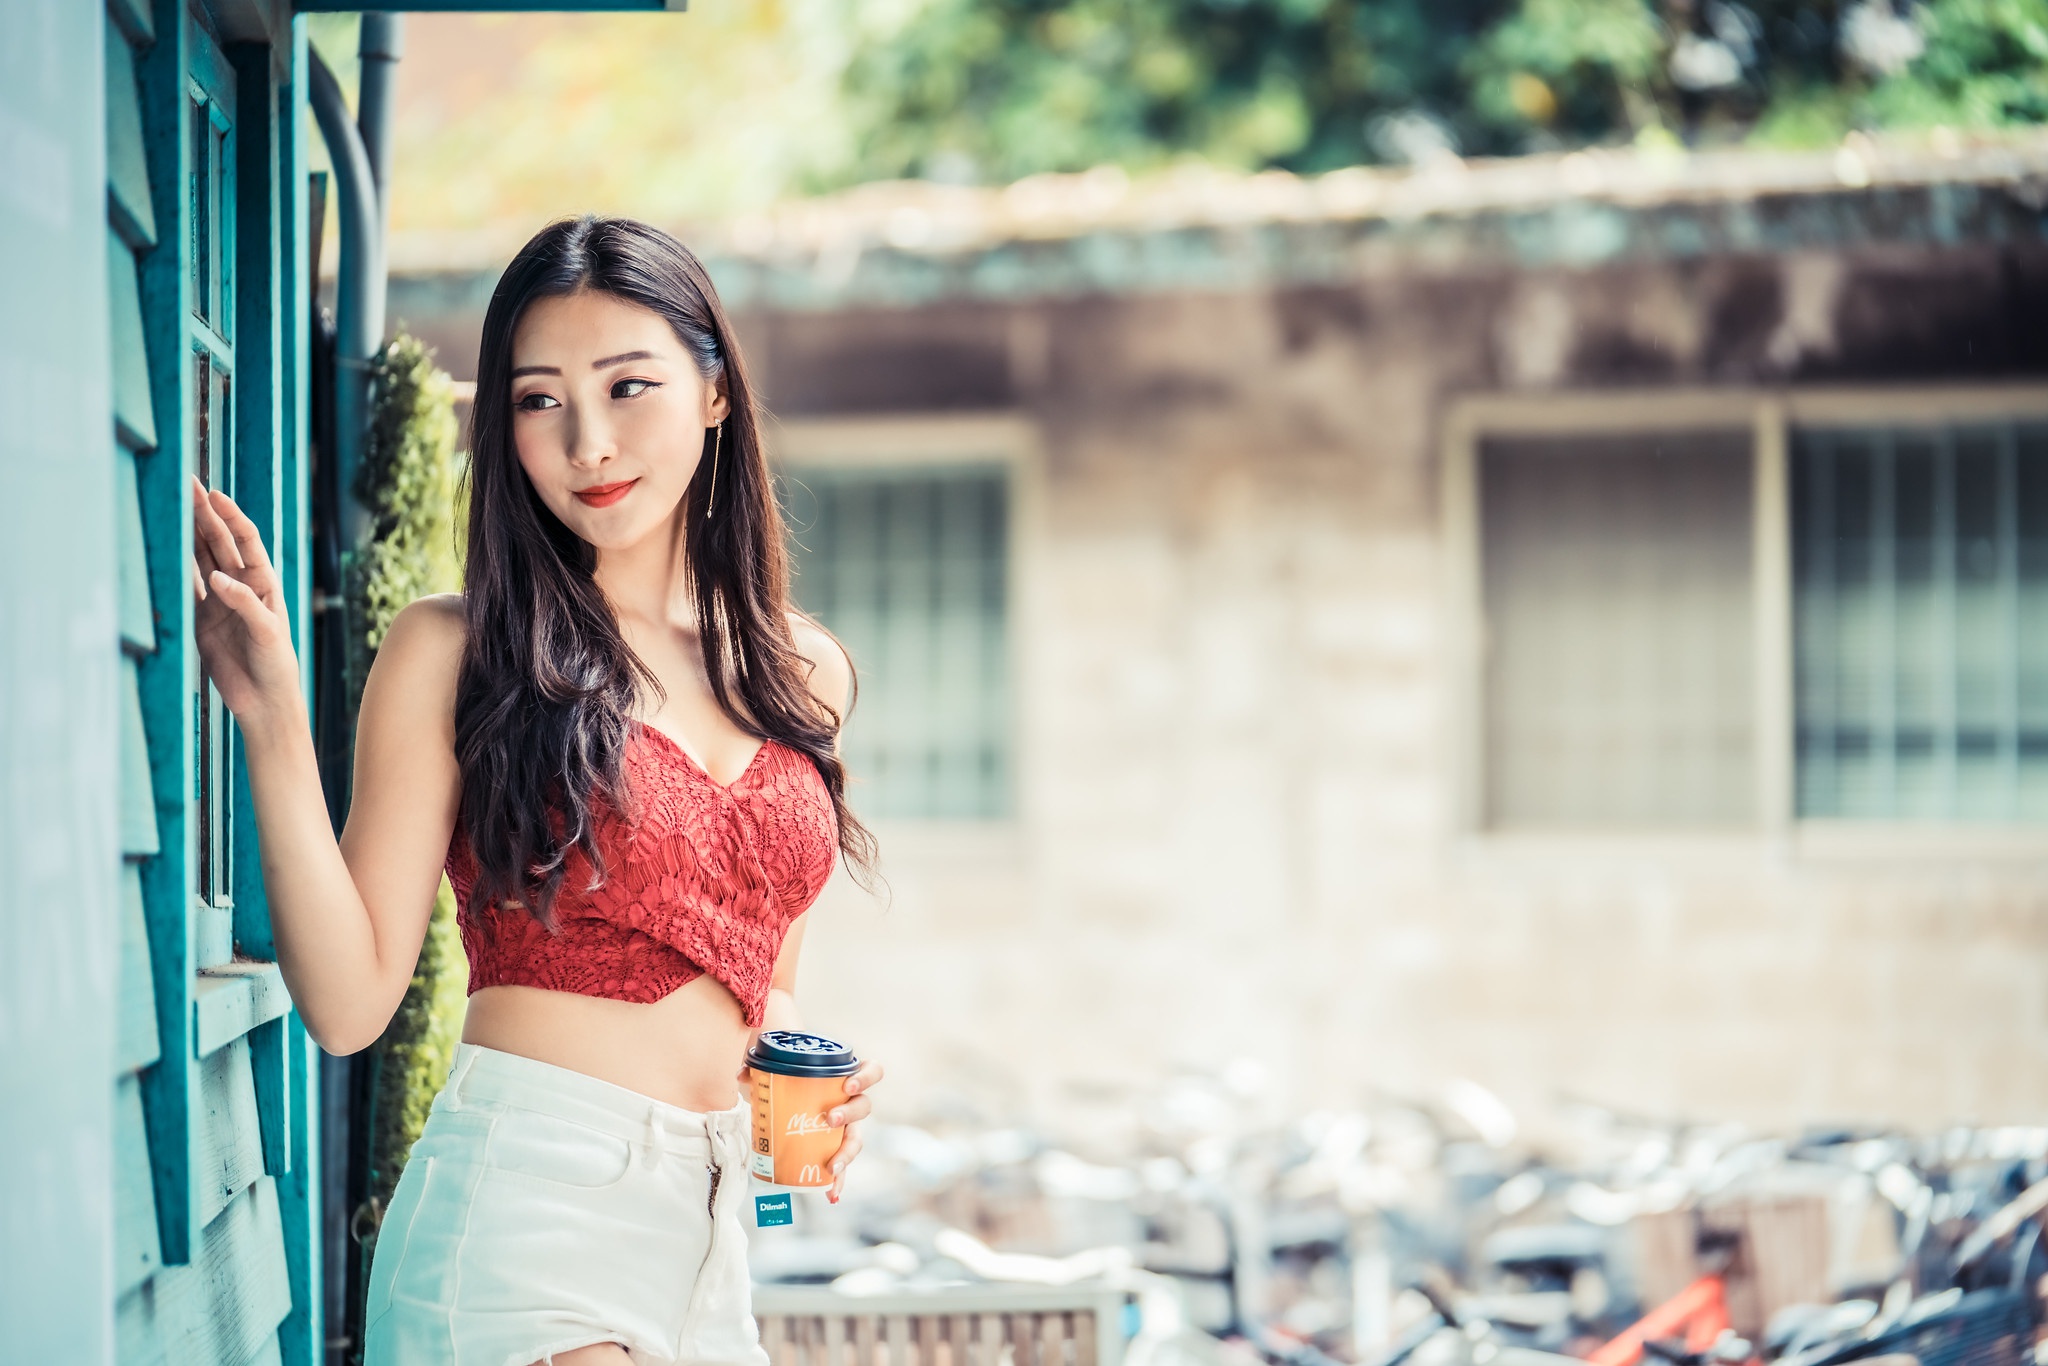 Asian Women Model Long Hair Brunette Red Tops Coffee Cup Leaning Building Window Shorts Earring Bicy 2048x1366